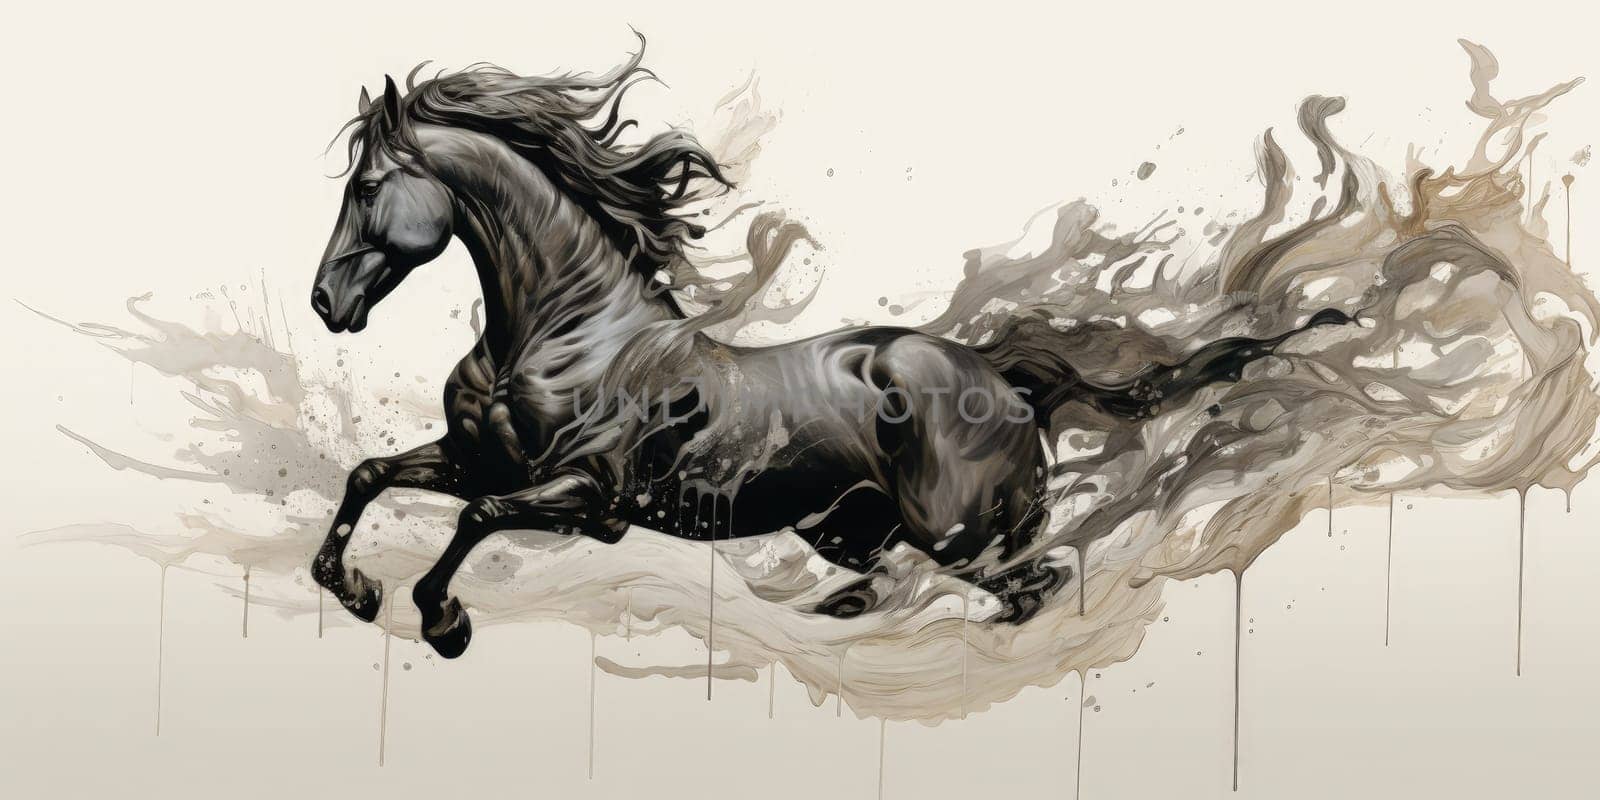 A majestic horse depicted through an ink-dripping drawing, where the flowing ink forms the intricate details of the horse's mane and musculature by Kadula